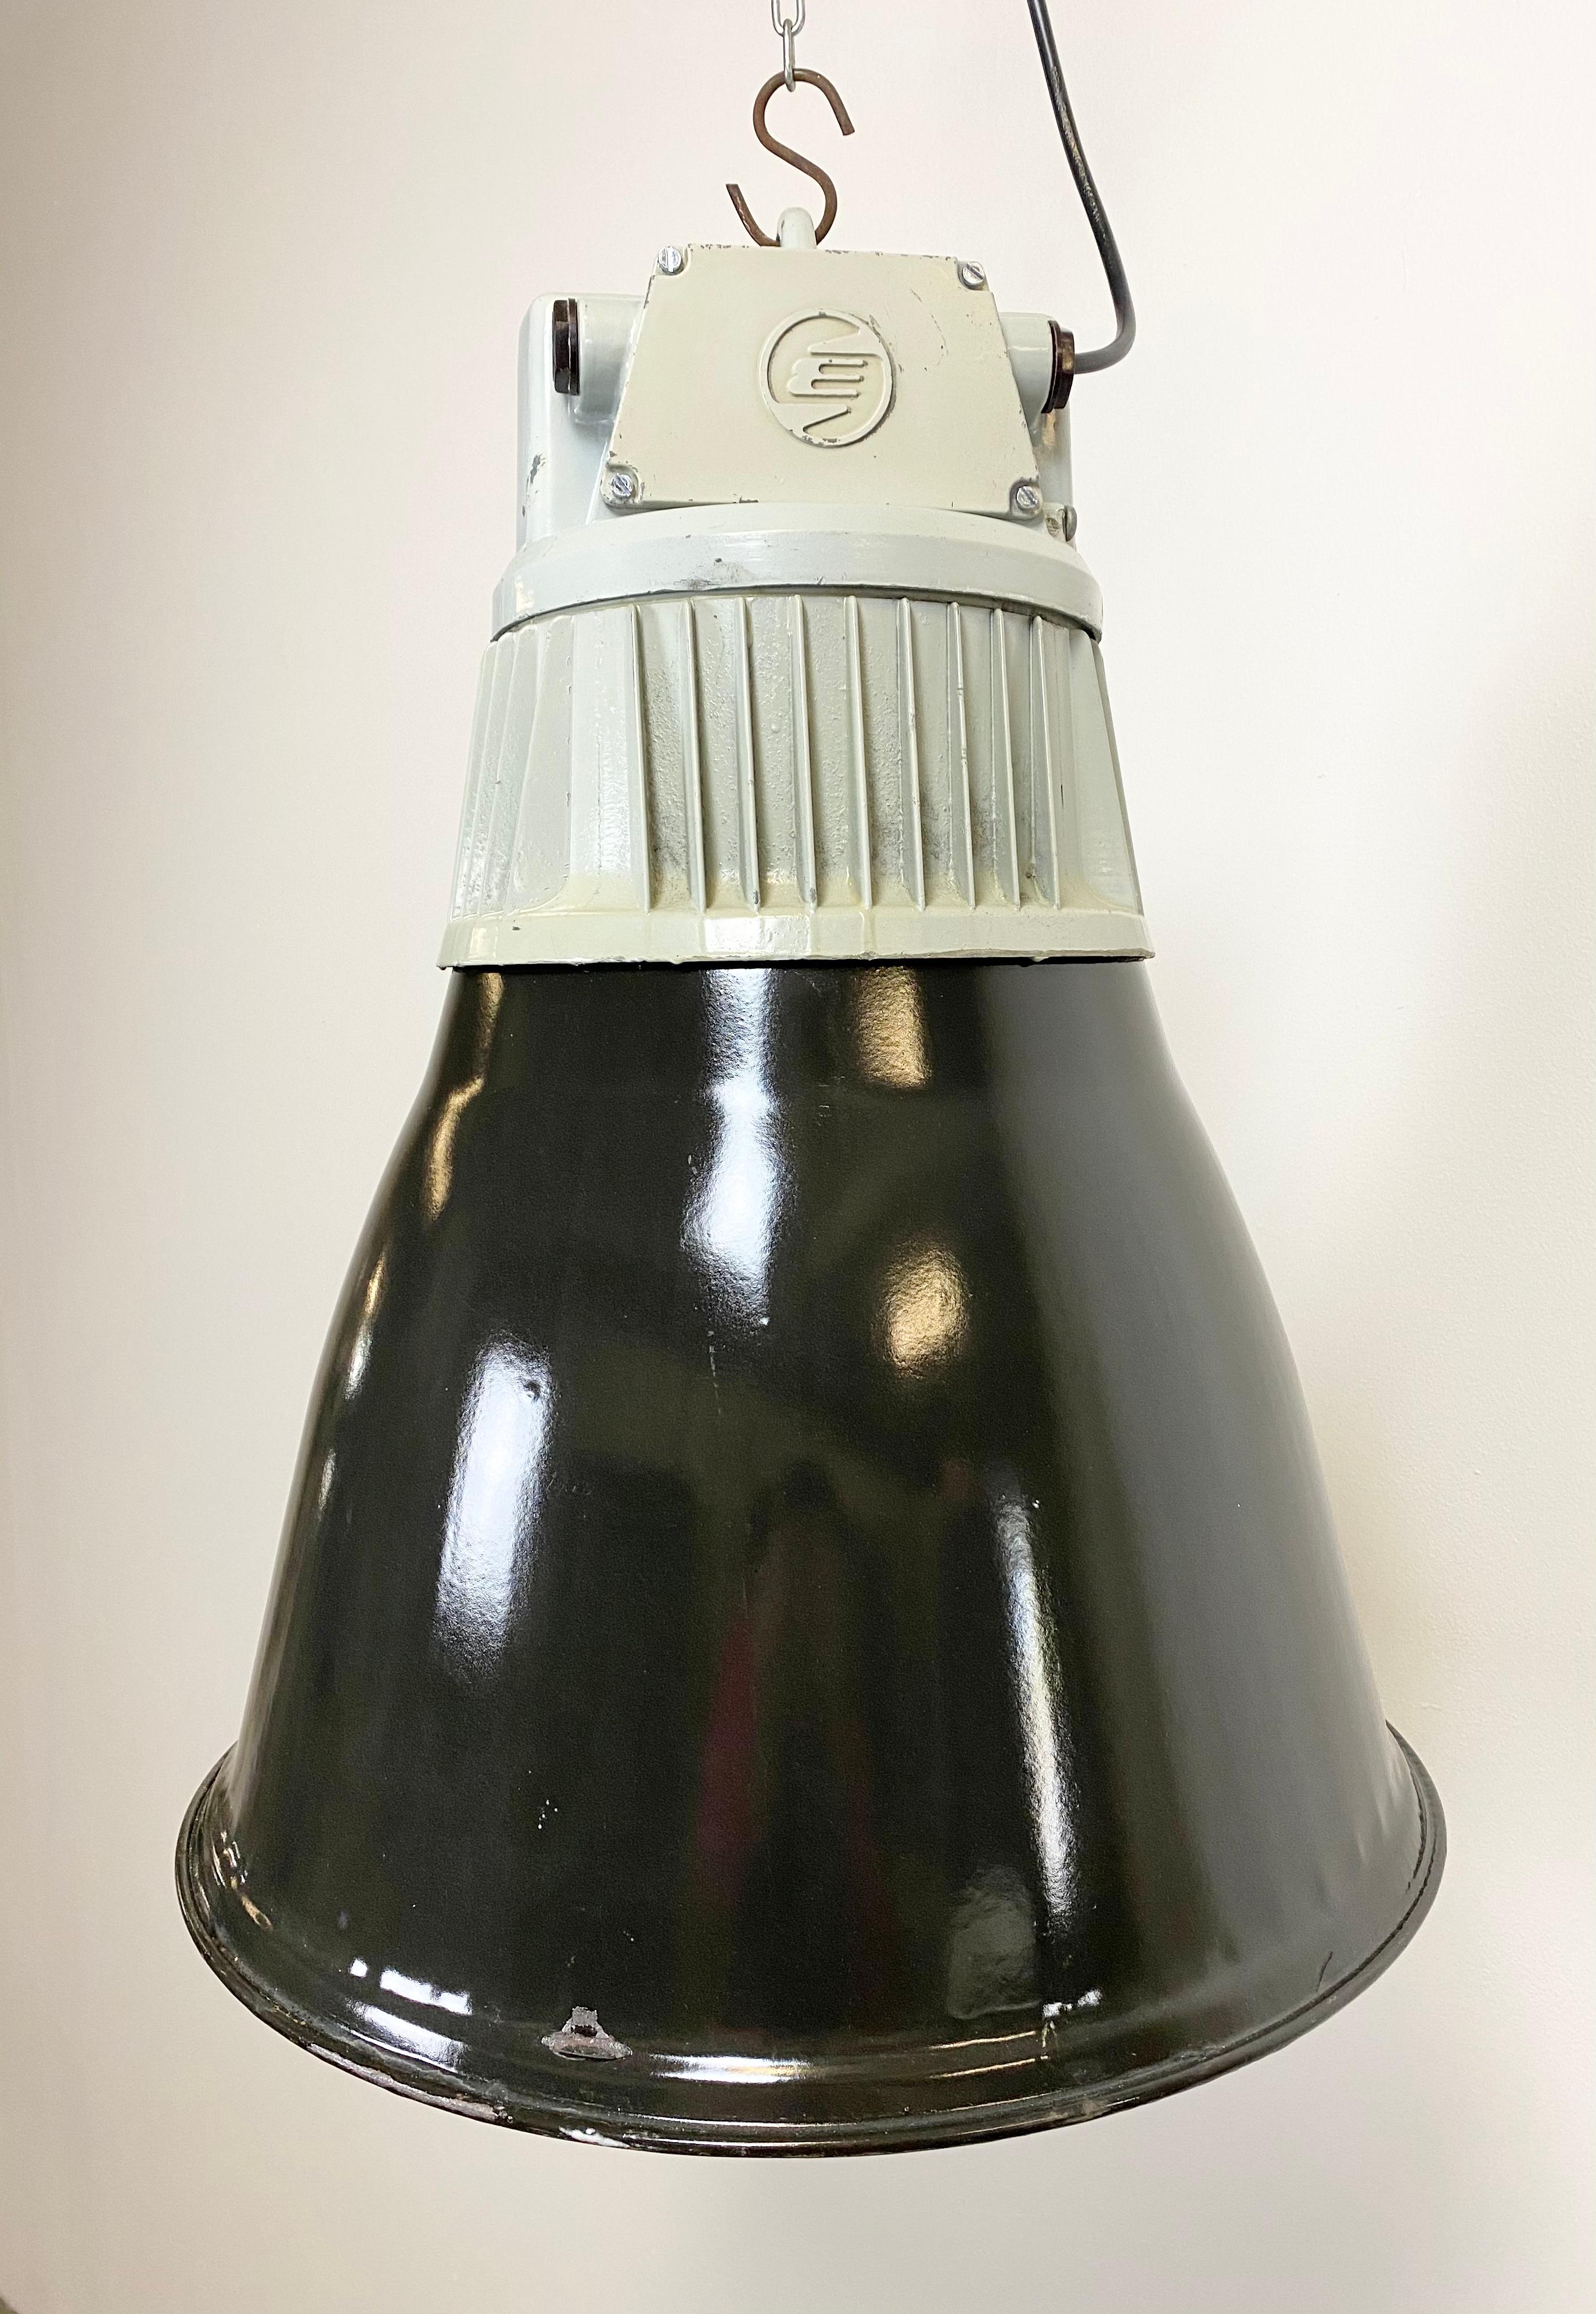 - Industrial factory hall lamp
- Manufactured by Elektrosvit
- Produced in former Czechoslovakia during the 1970s
- Black enamel shade with white interior
- Grey cast aluminium top
- Weight: 6 kg
- New porcelain socket requires standard  E27 / E26